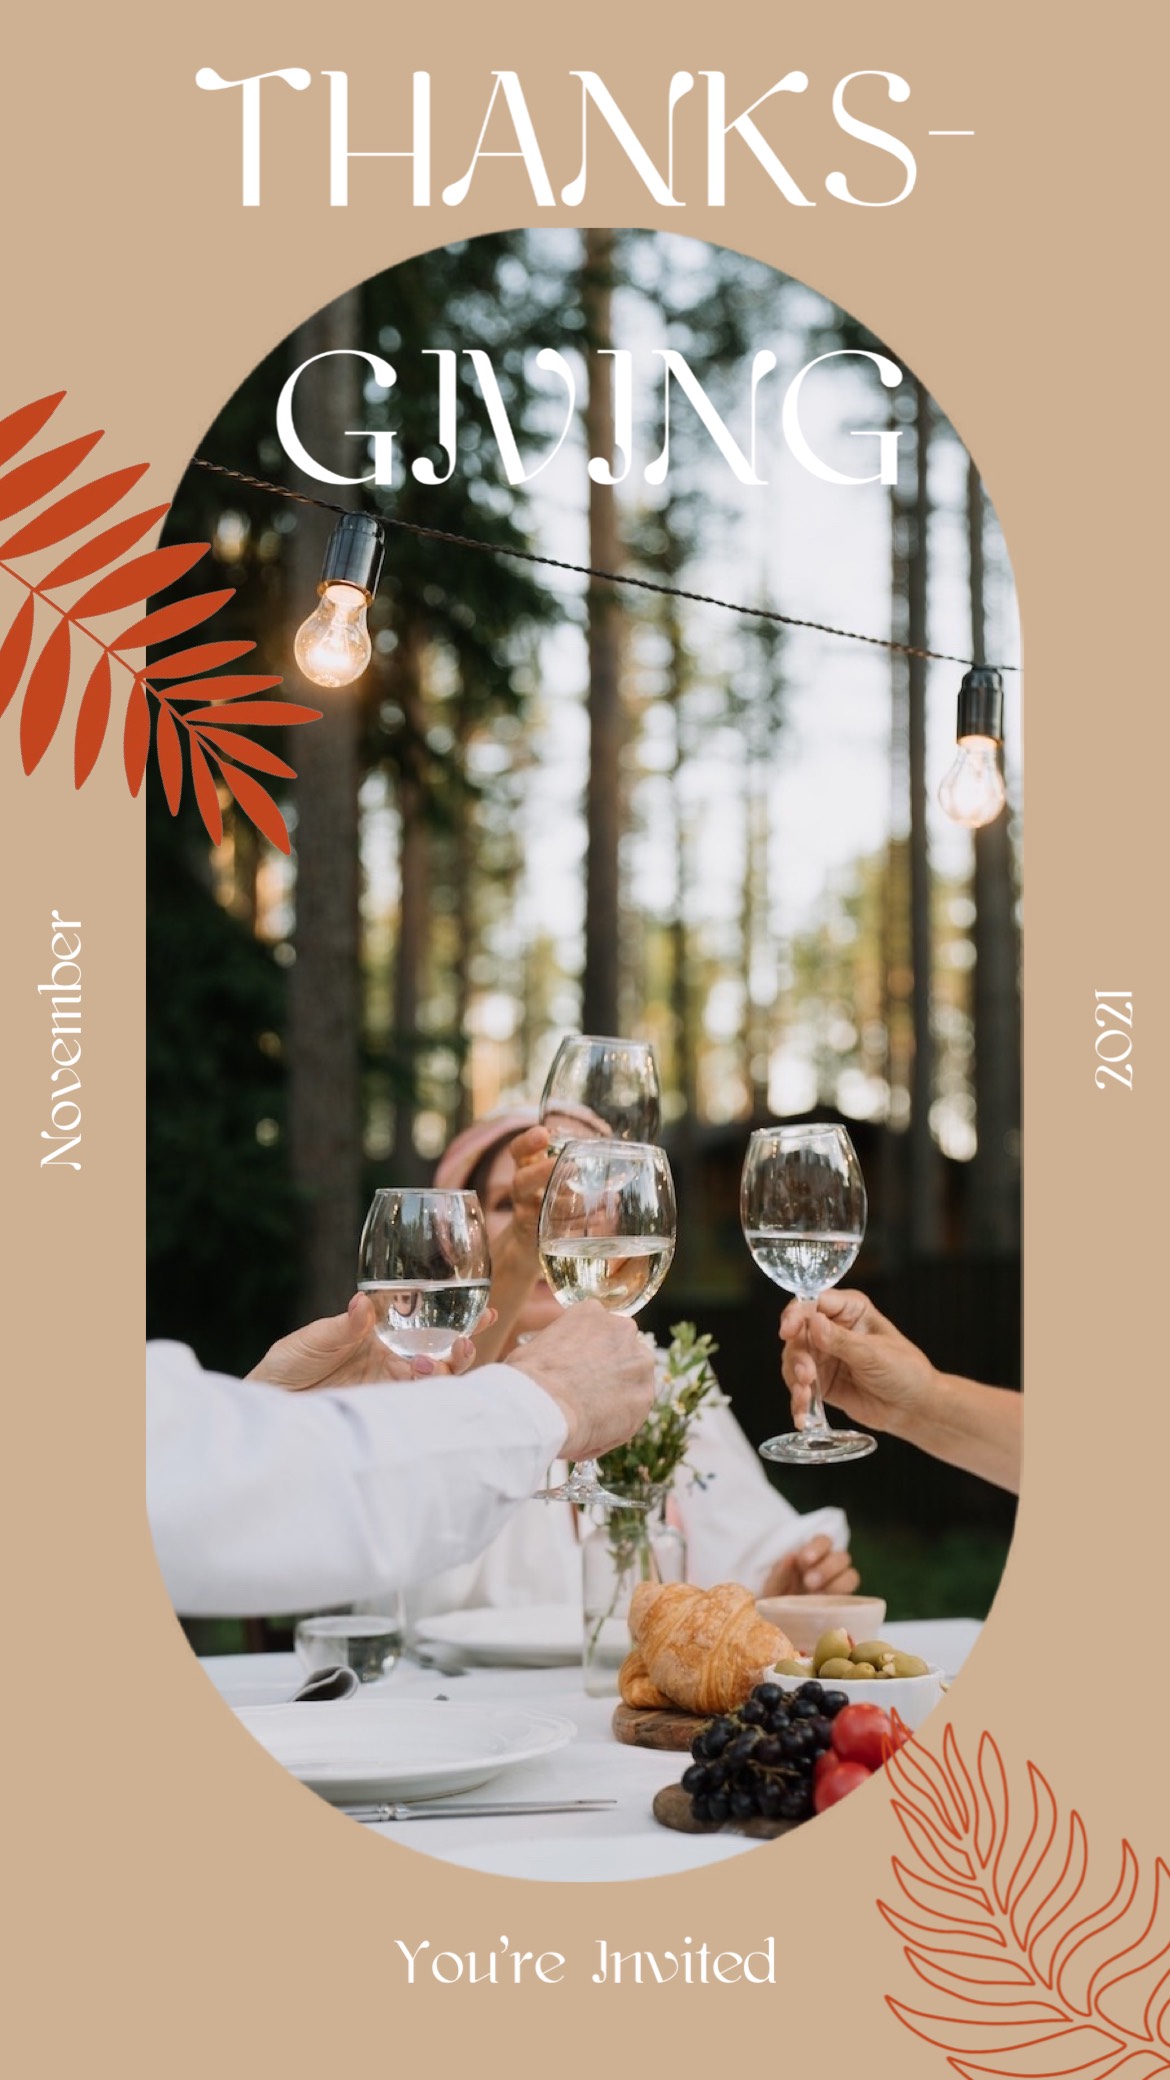 Two People Toasting Wine Glasses At A Dinner Table Thanksgiving Template